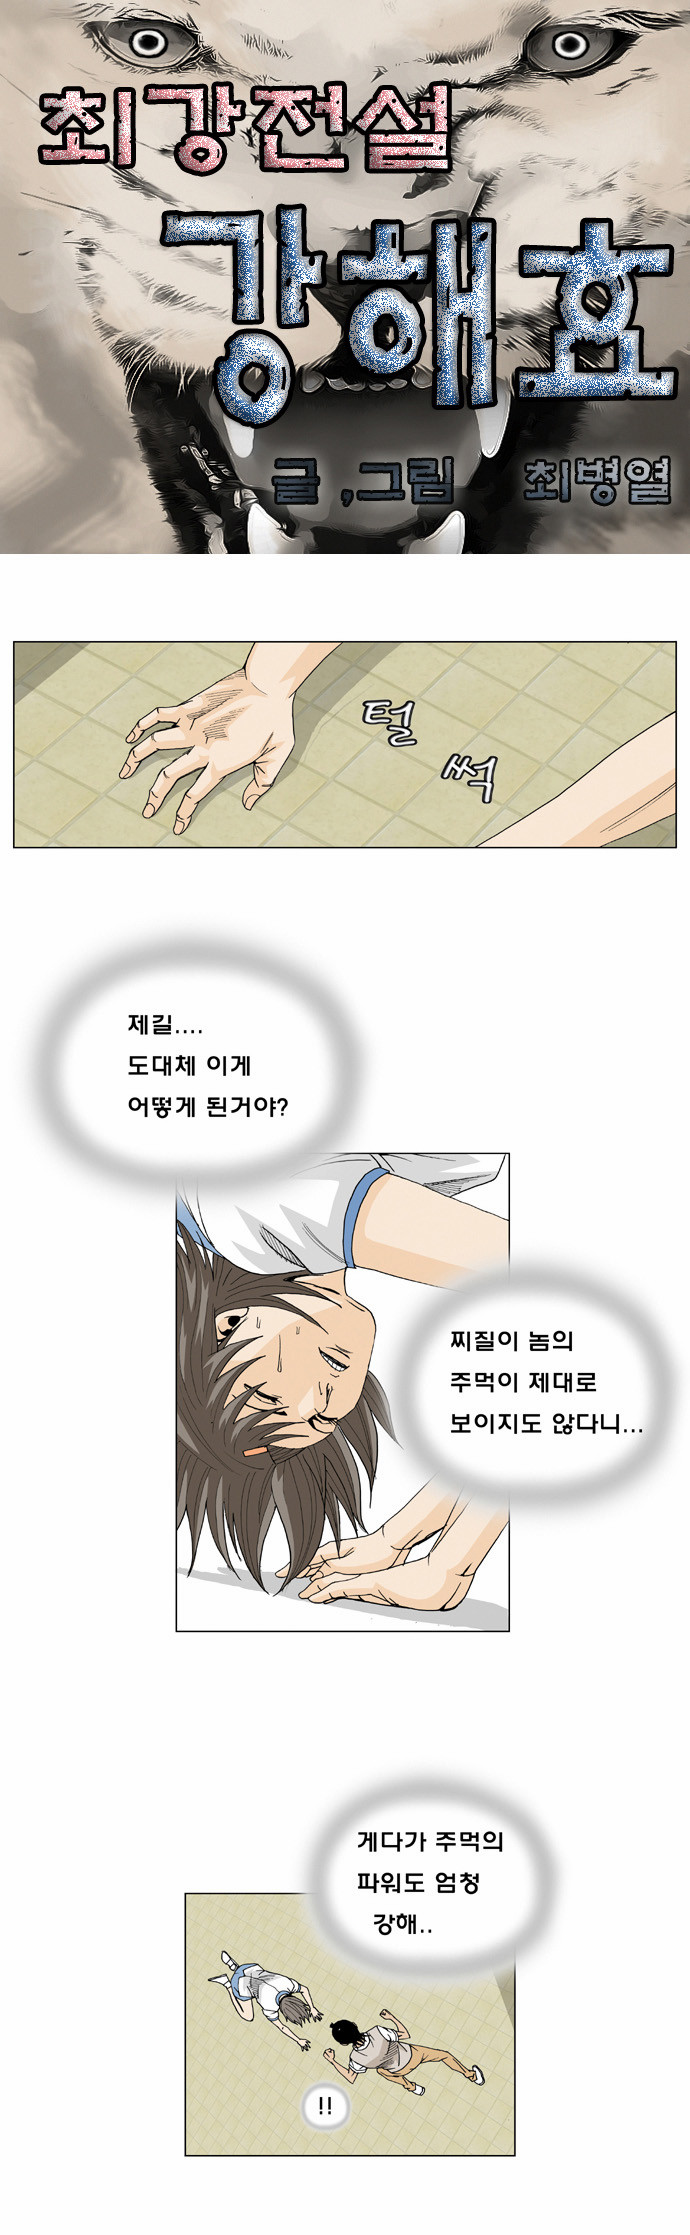 Ultimate Legend - Kang Hae Hyo - Chapter 9 - Page 3